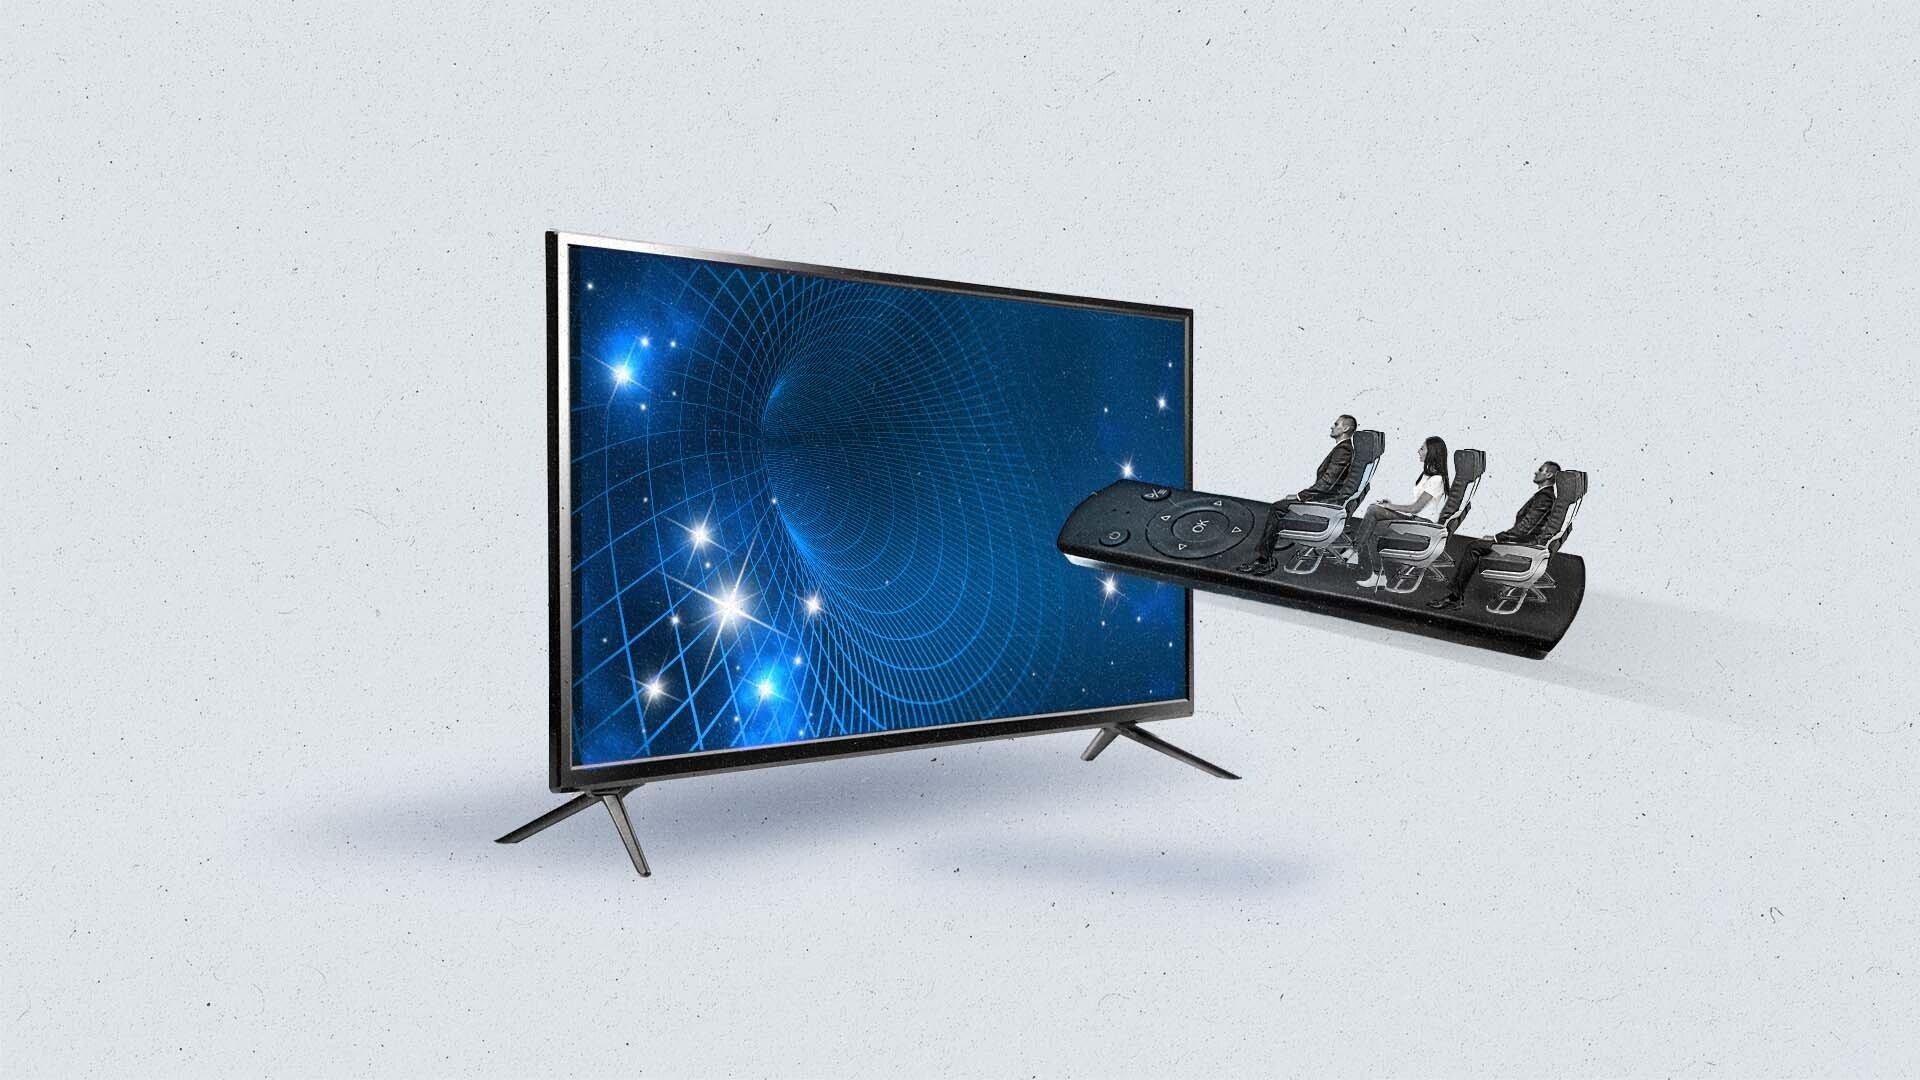 A remote control with rows of viewers soars into a connected TV.